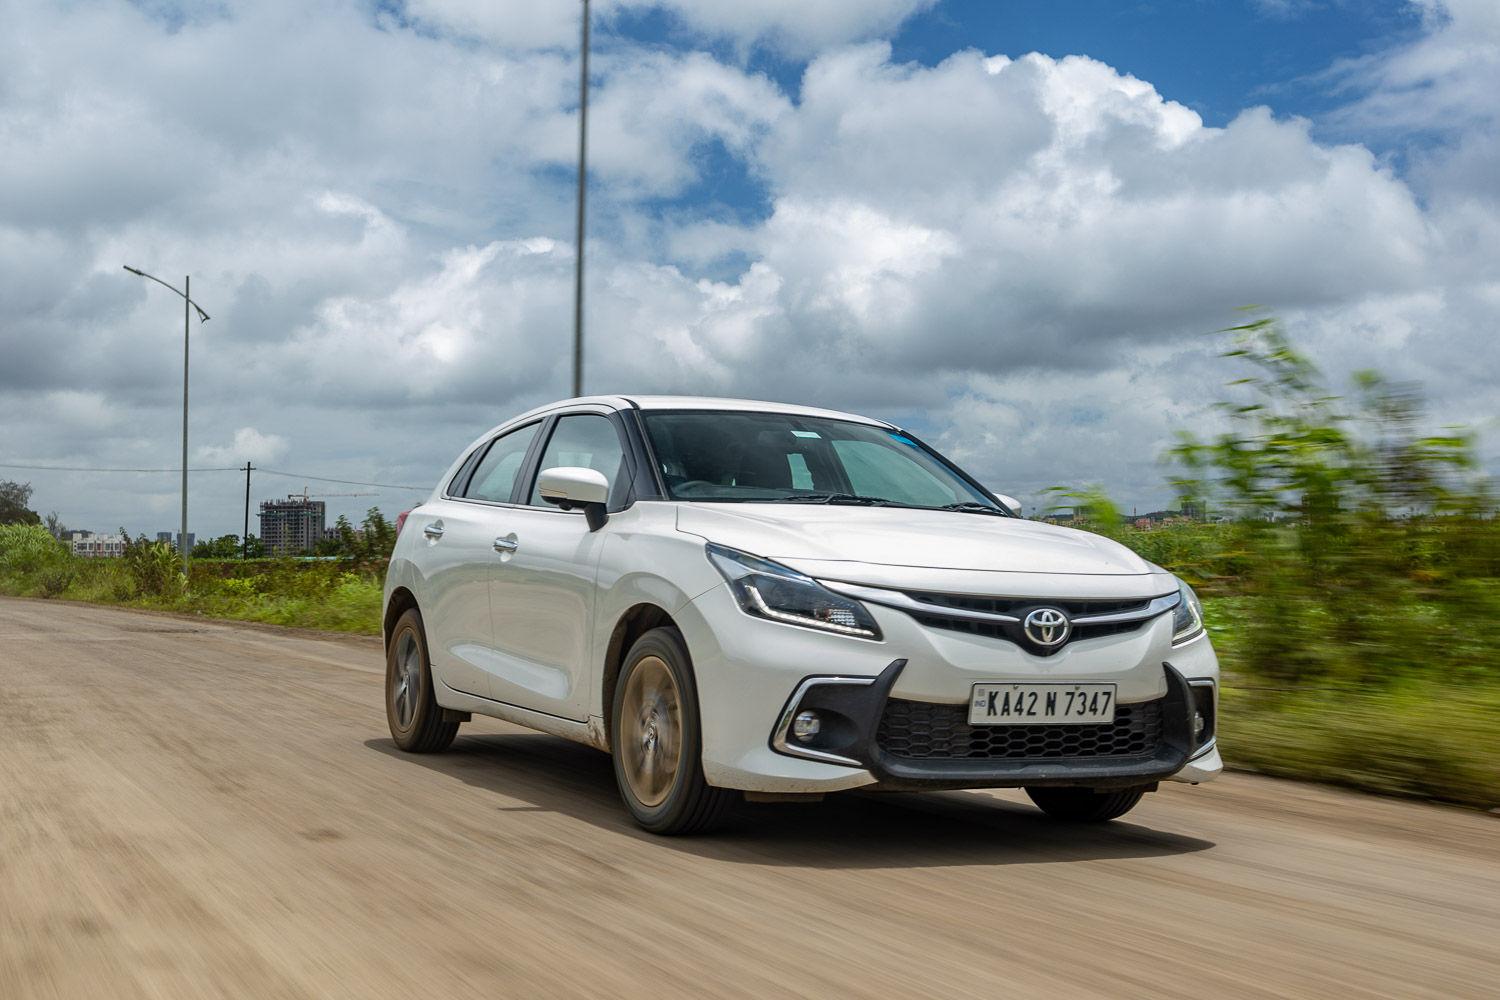 Toyota Glanza Review: The Better Baleno?